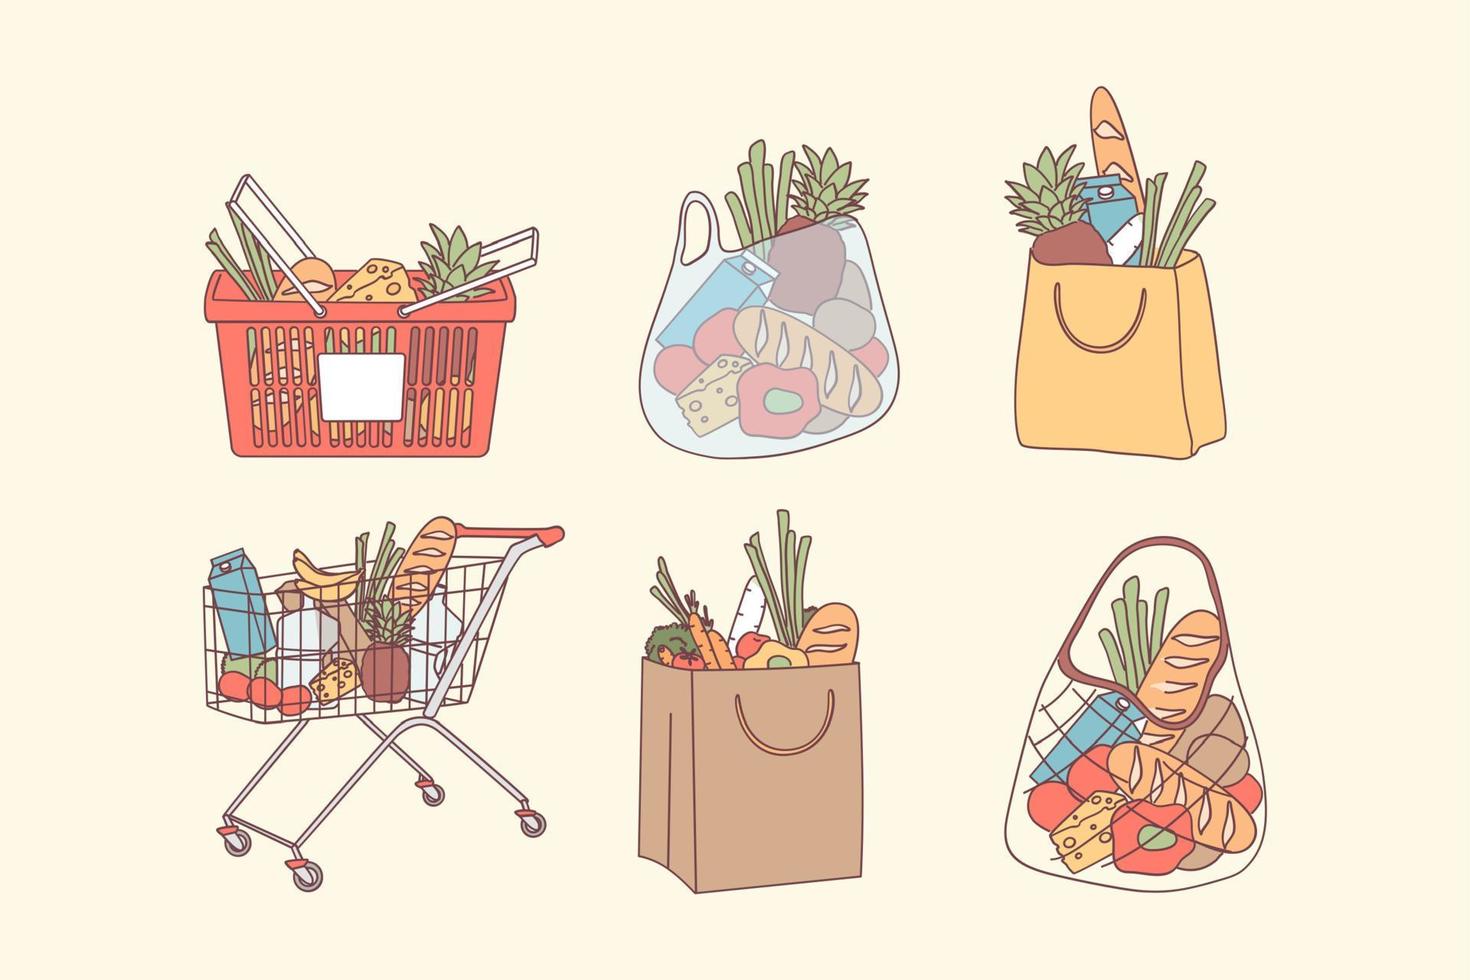 Shopping bags and grocery purchases concept. Full bags and baskets with natural food, organic fruits and vegetables for clean eating healthy diet vector illustration. Department store goods